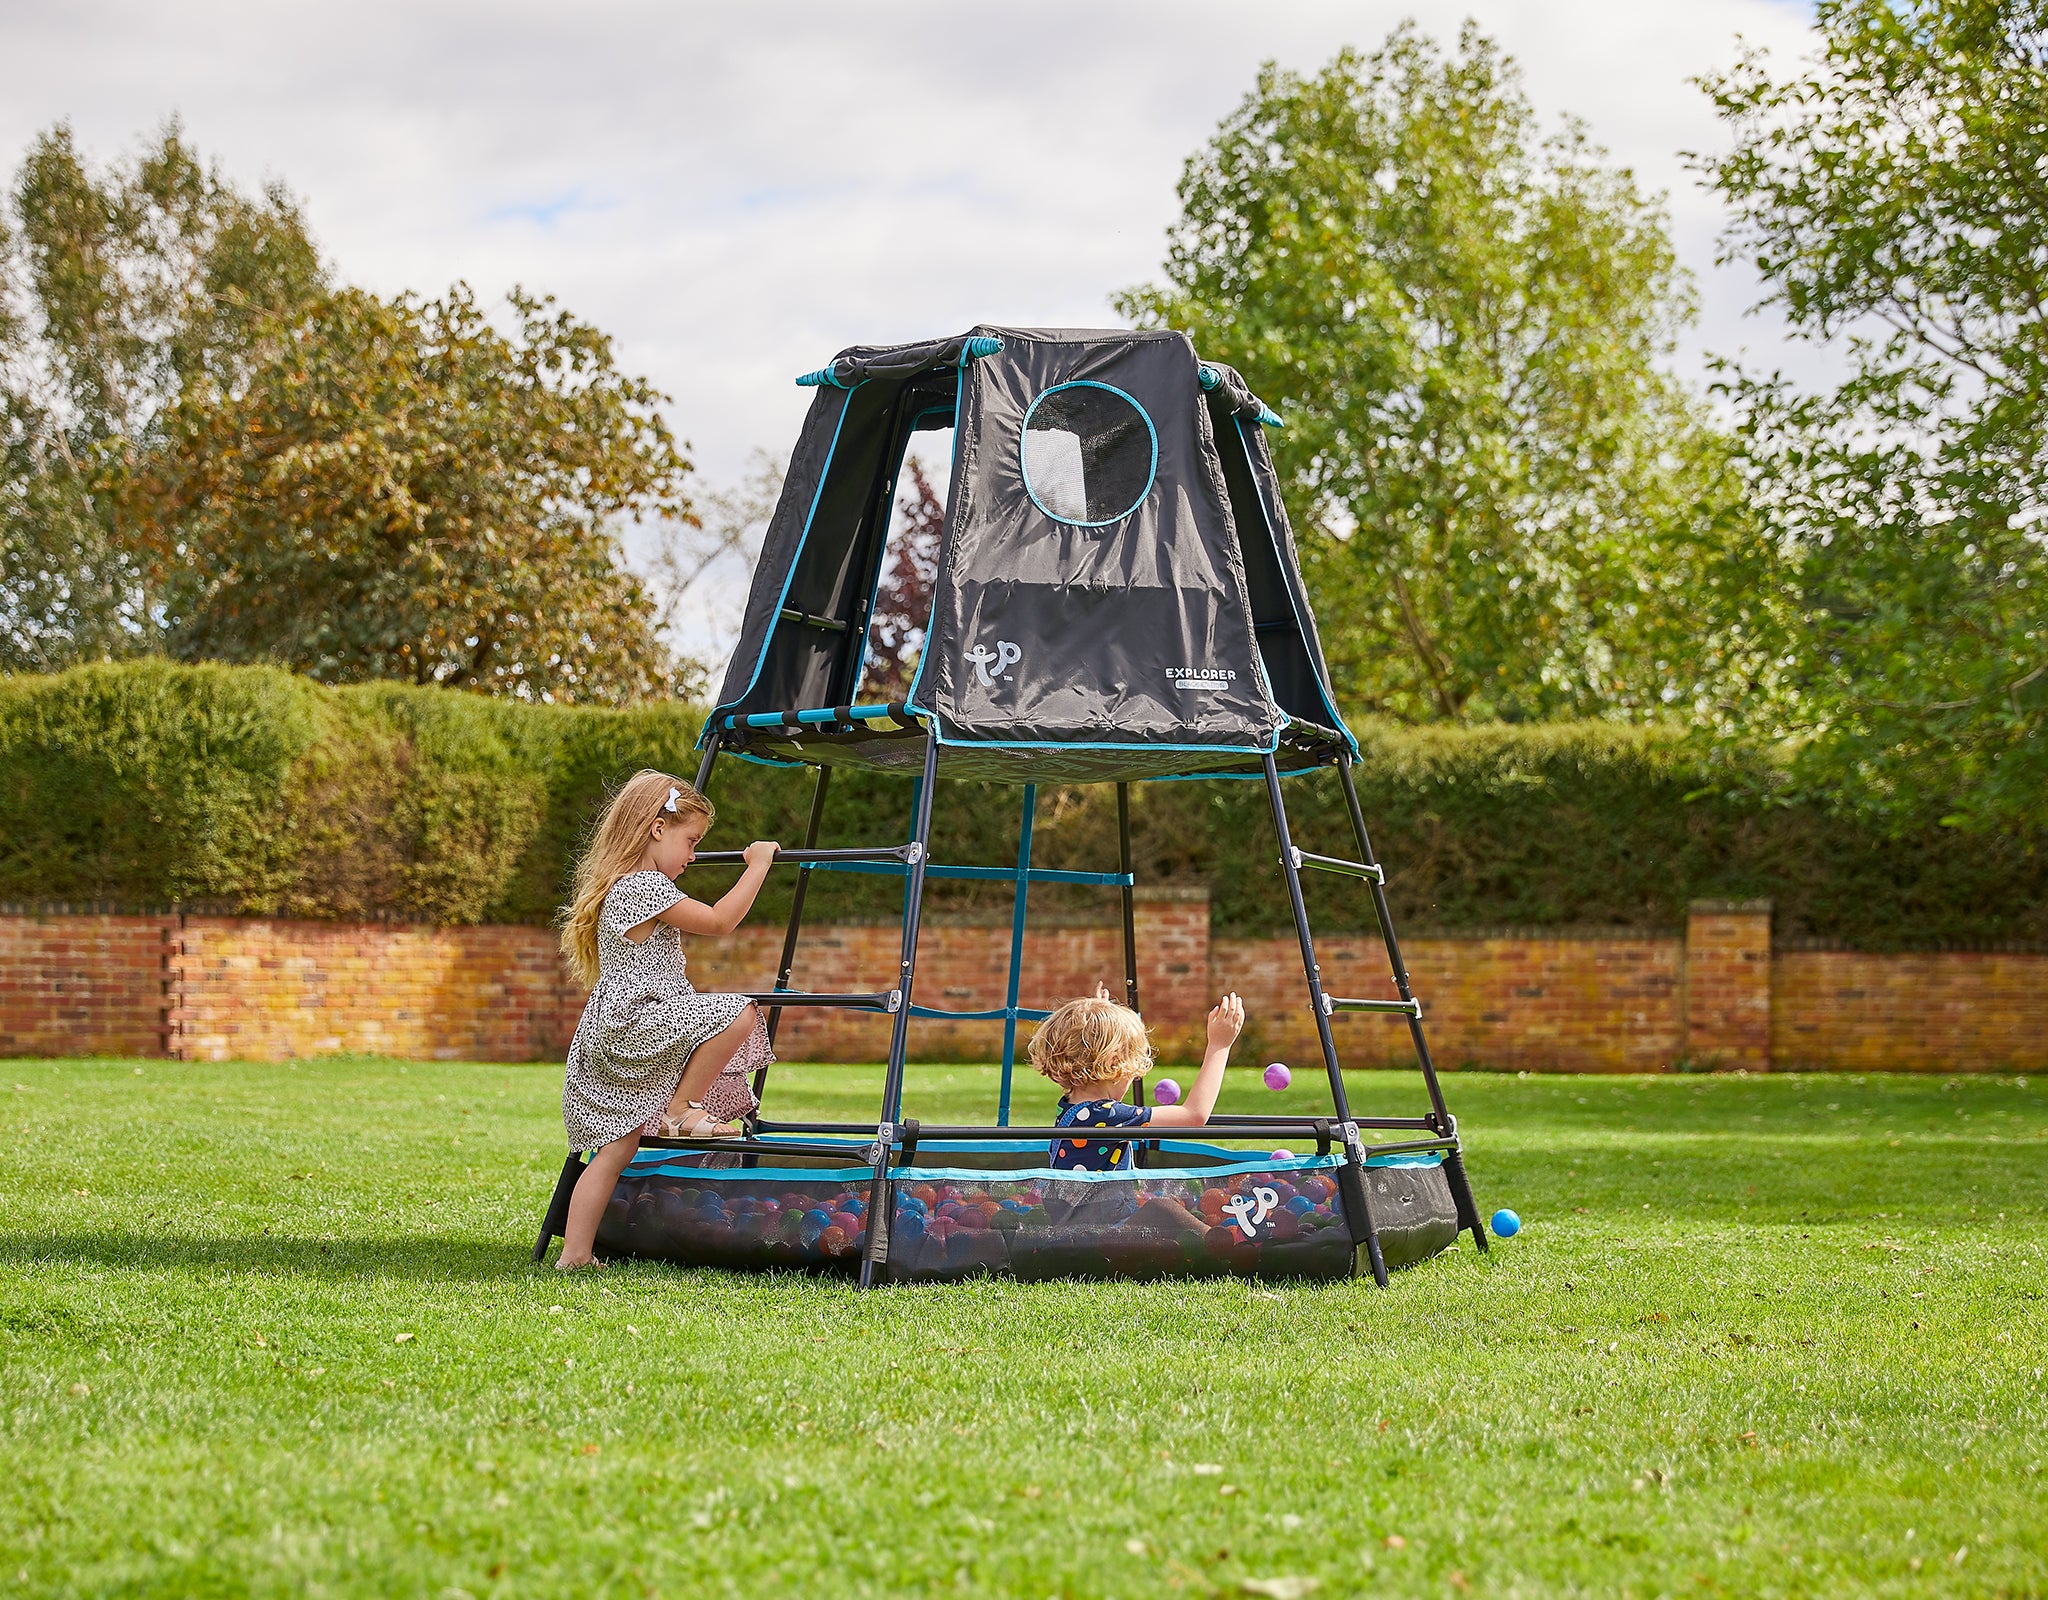 How to Decide on a Climbing Frame. Range of Designs and Size